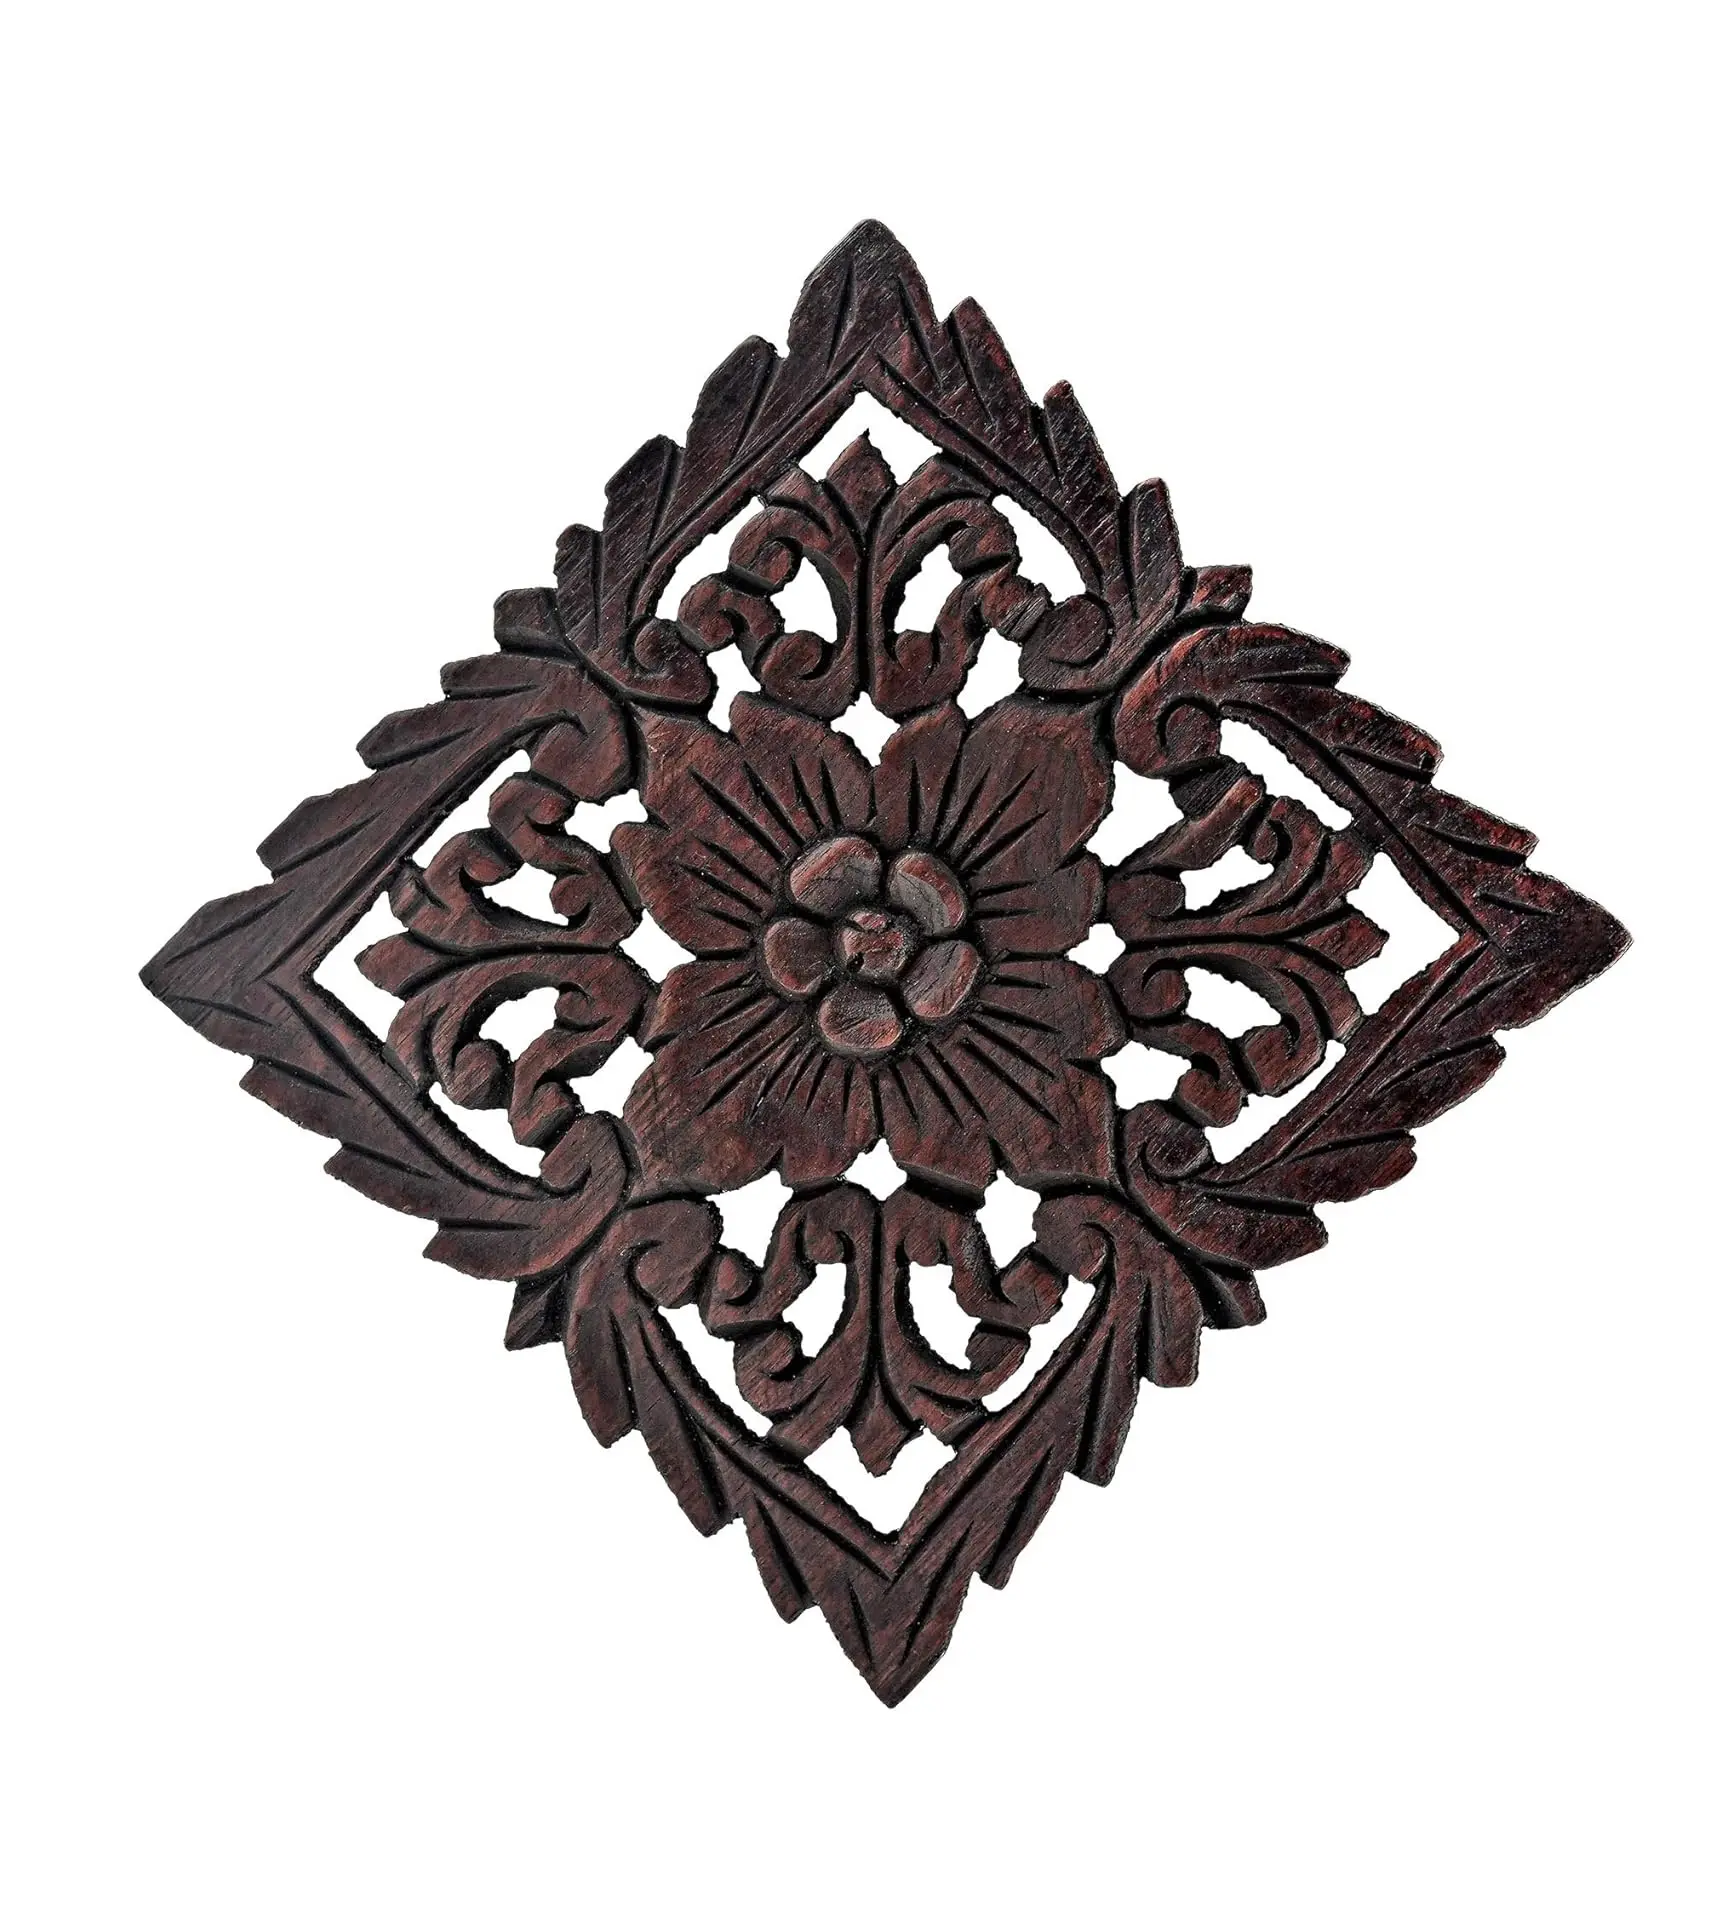 Tropical Forest Inspired Hand Carved Teak Wood Floral Wall Art -8 Inches | Lotus Flower Wall Art | Floral Wall Decor | Living